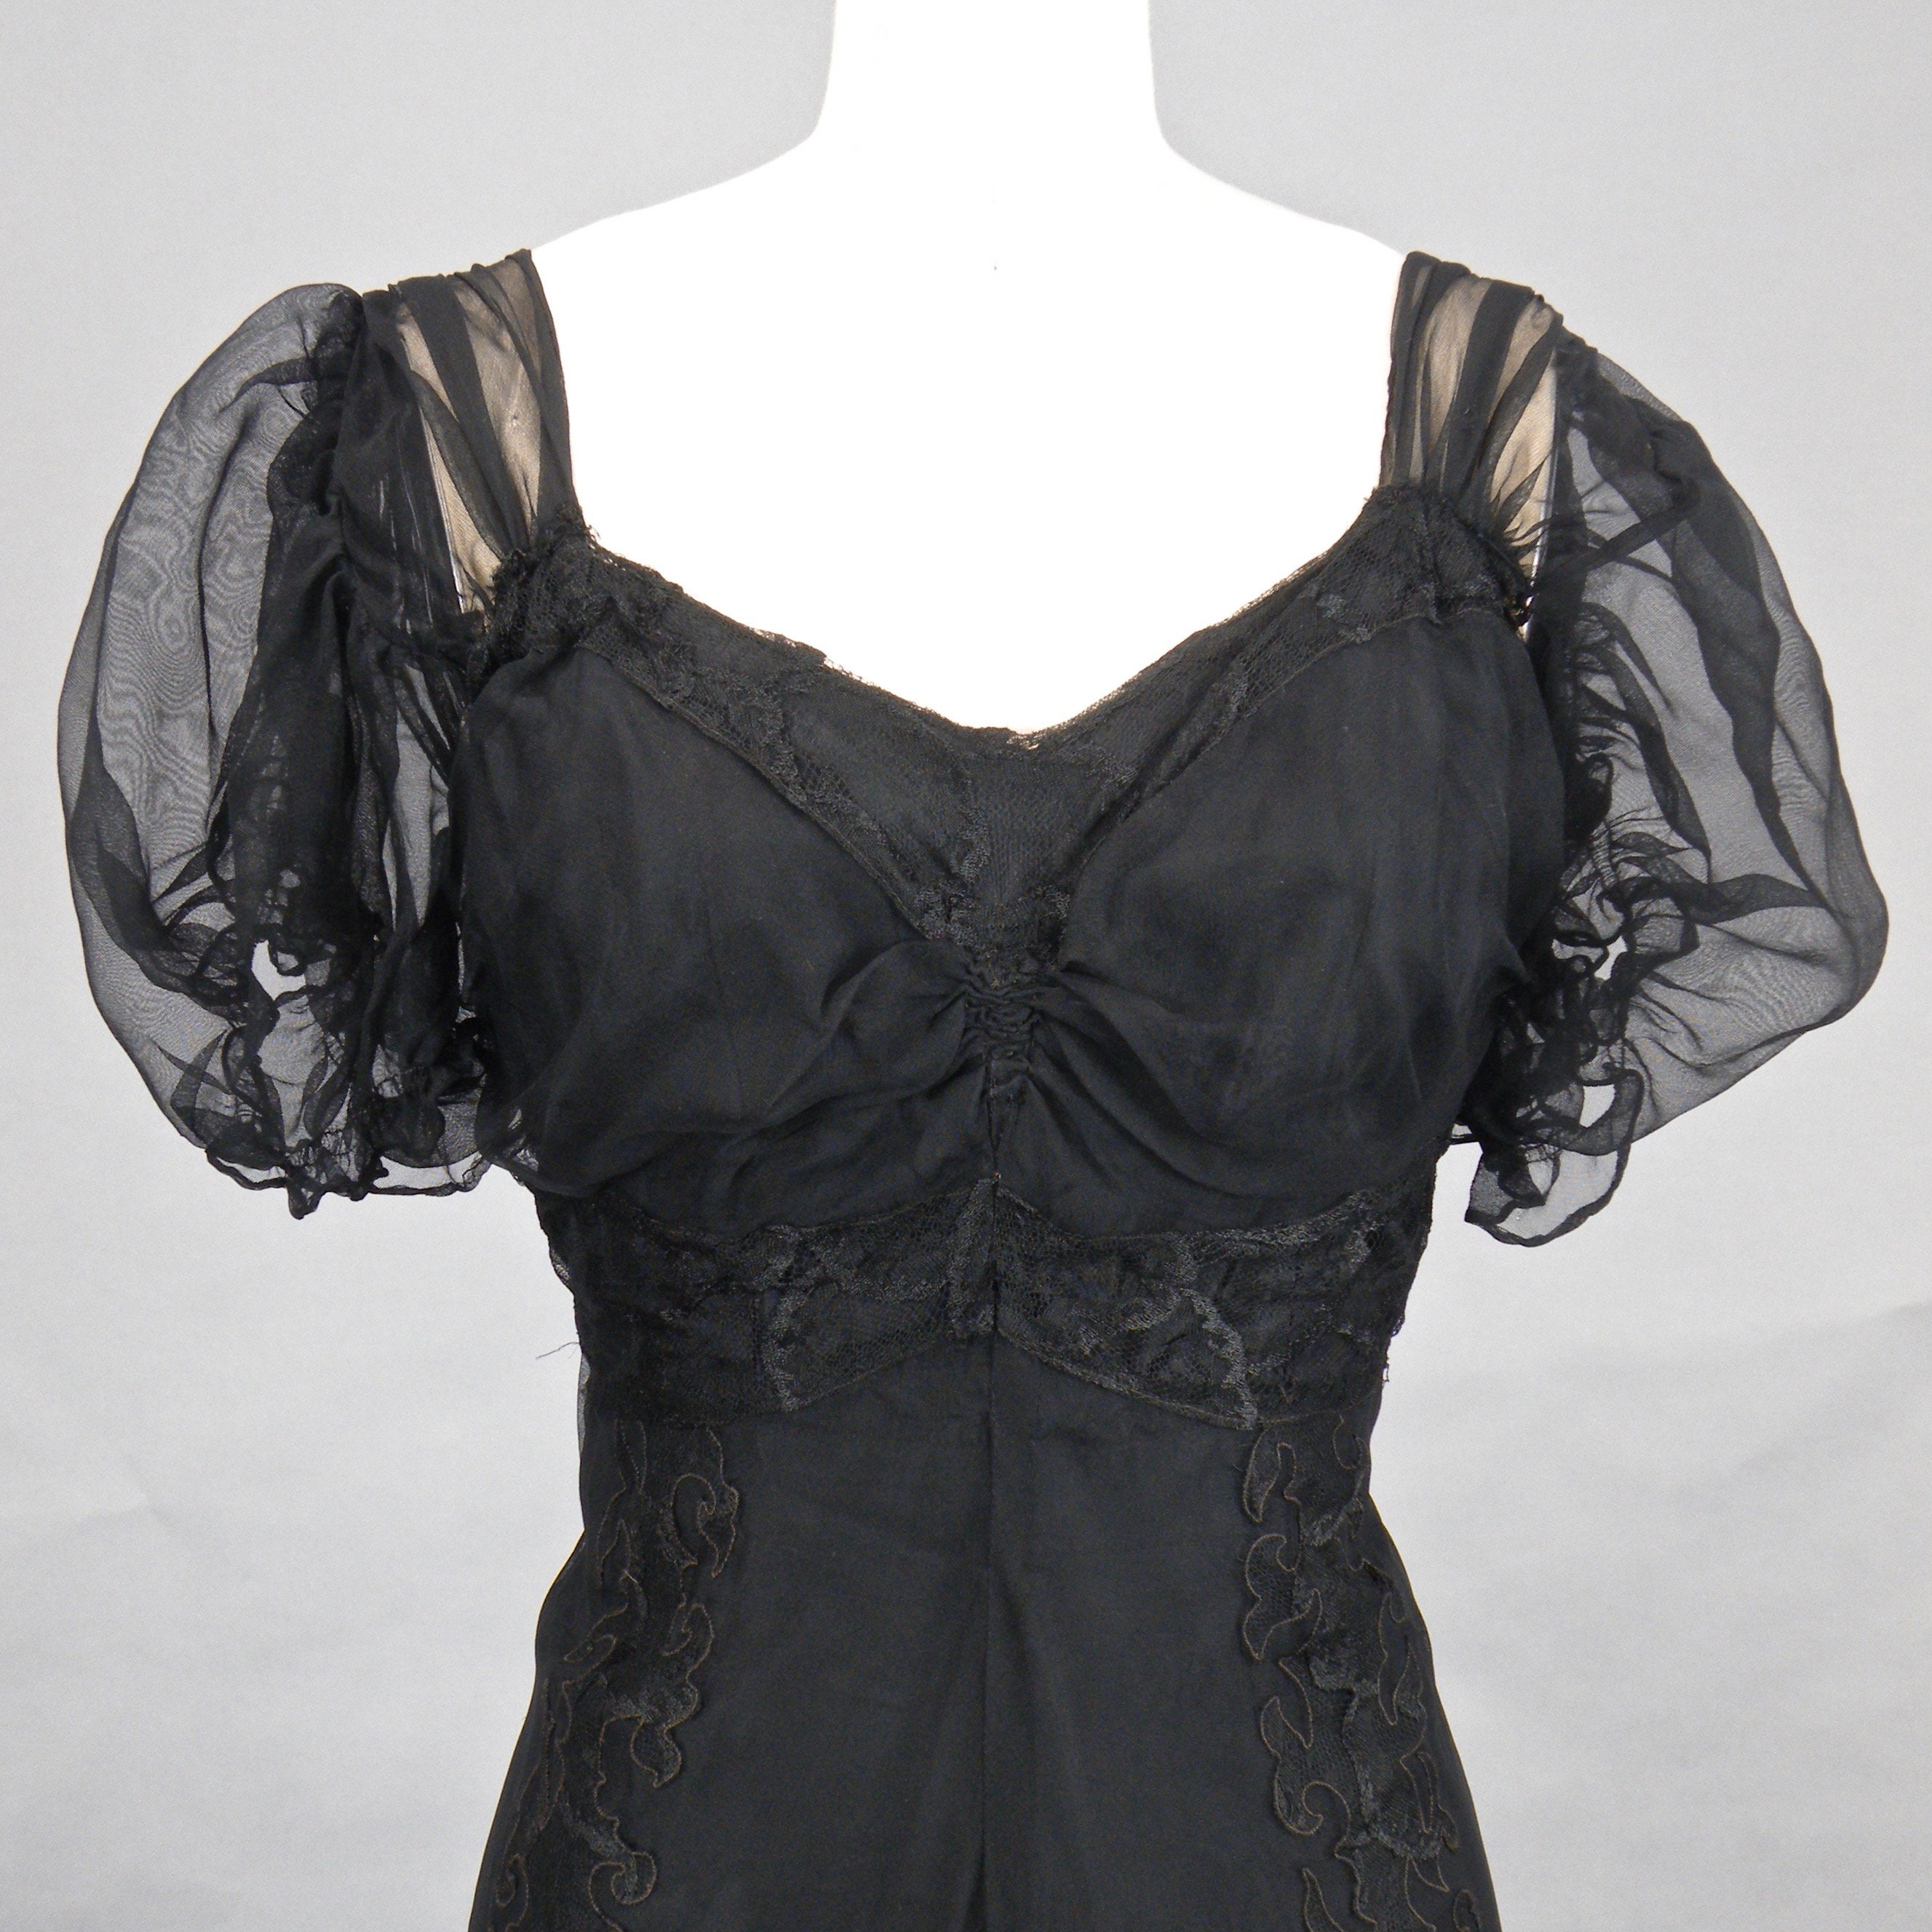 Vintage 1930s 40s Black Net and Lace Evening Dress, Old Hollywood ...